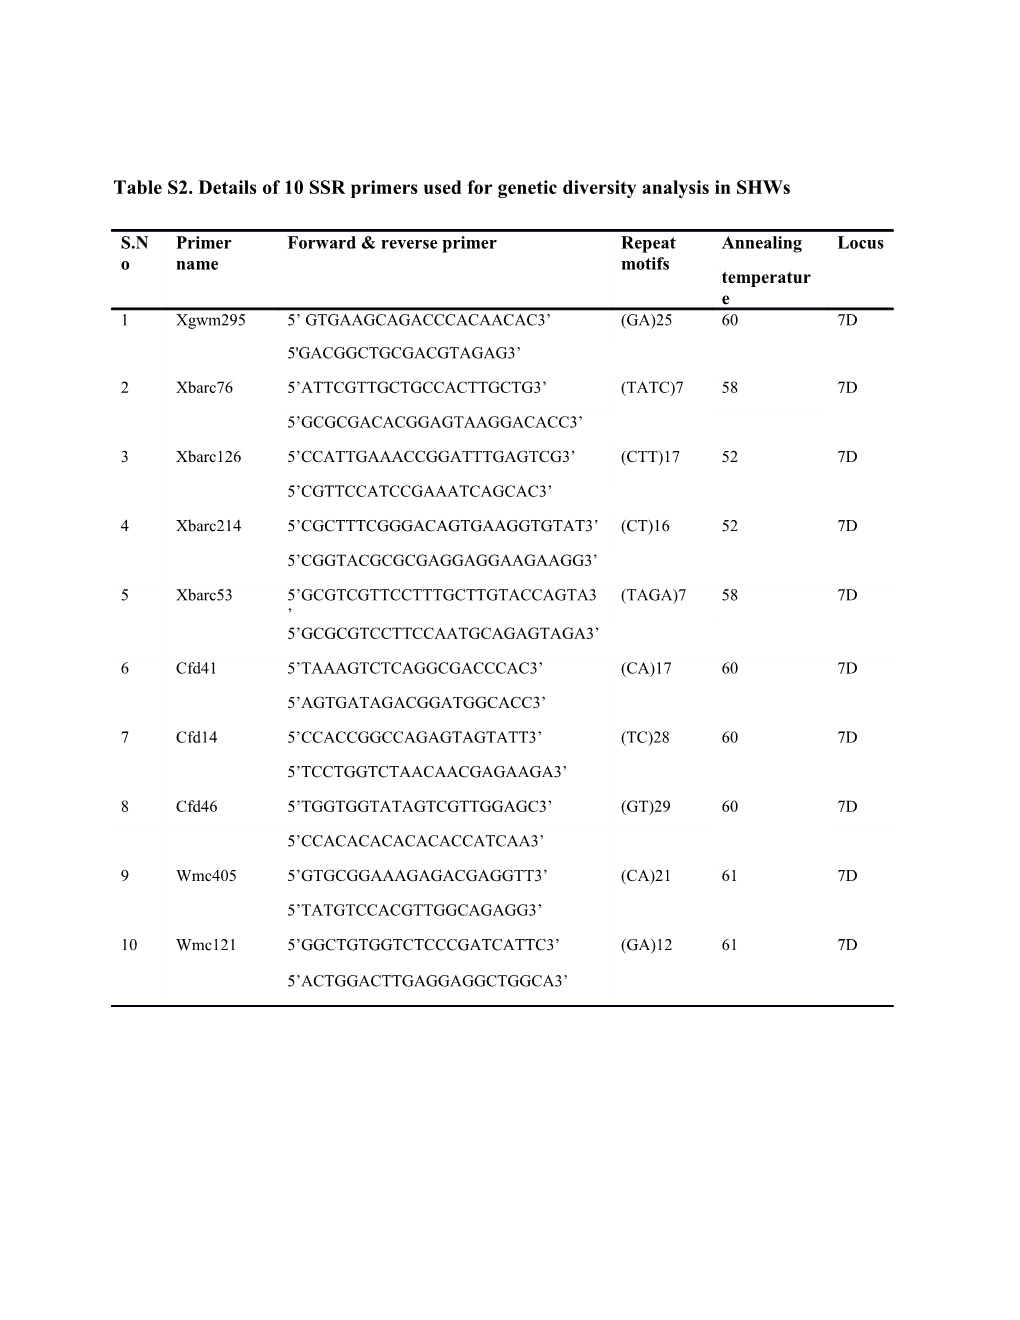 Table S1. Pedigree of Selected Wheat D-Genome Synthetic Hexaploids Used in This Study